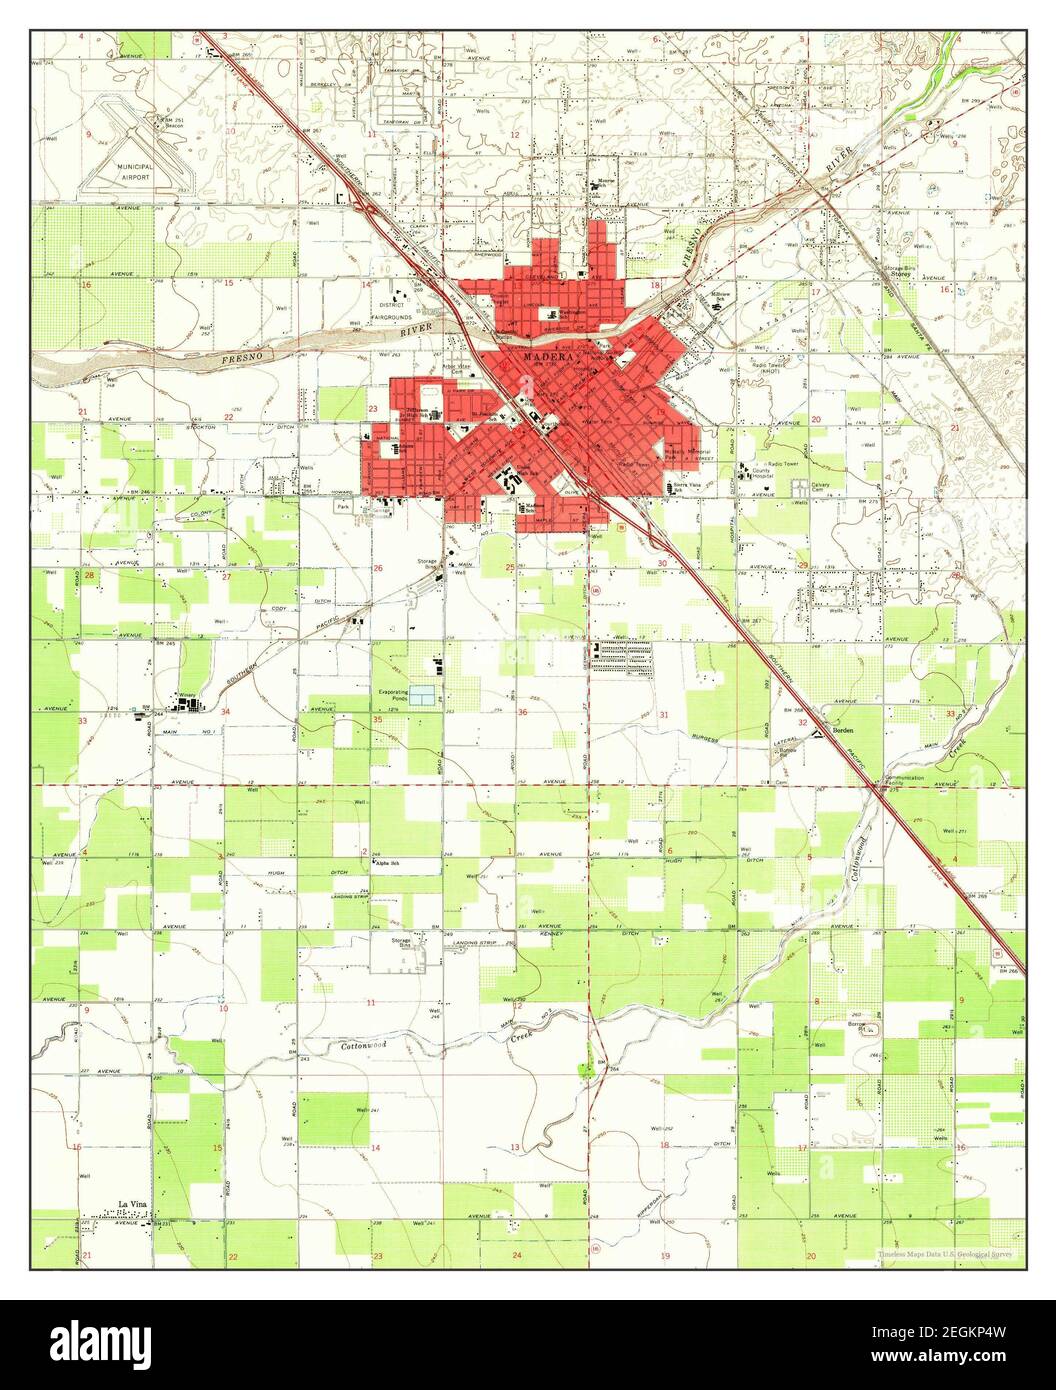 Madera, California, map 1963, 1:24000, United States of America by Timeless Maps, data U.S. Geological Survey Stock Photo